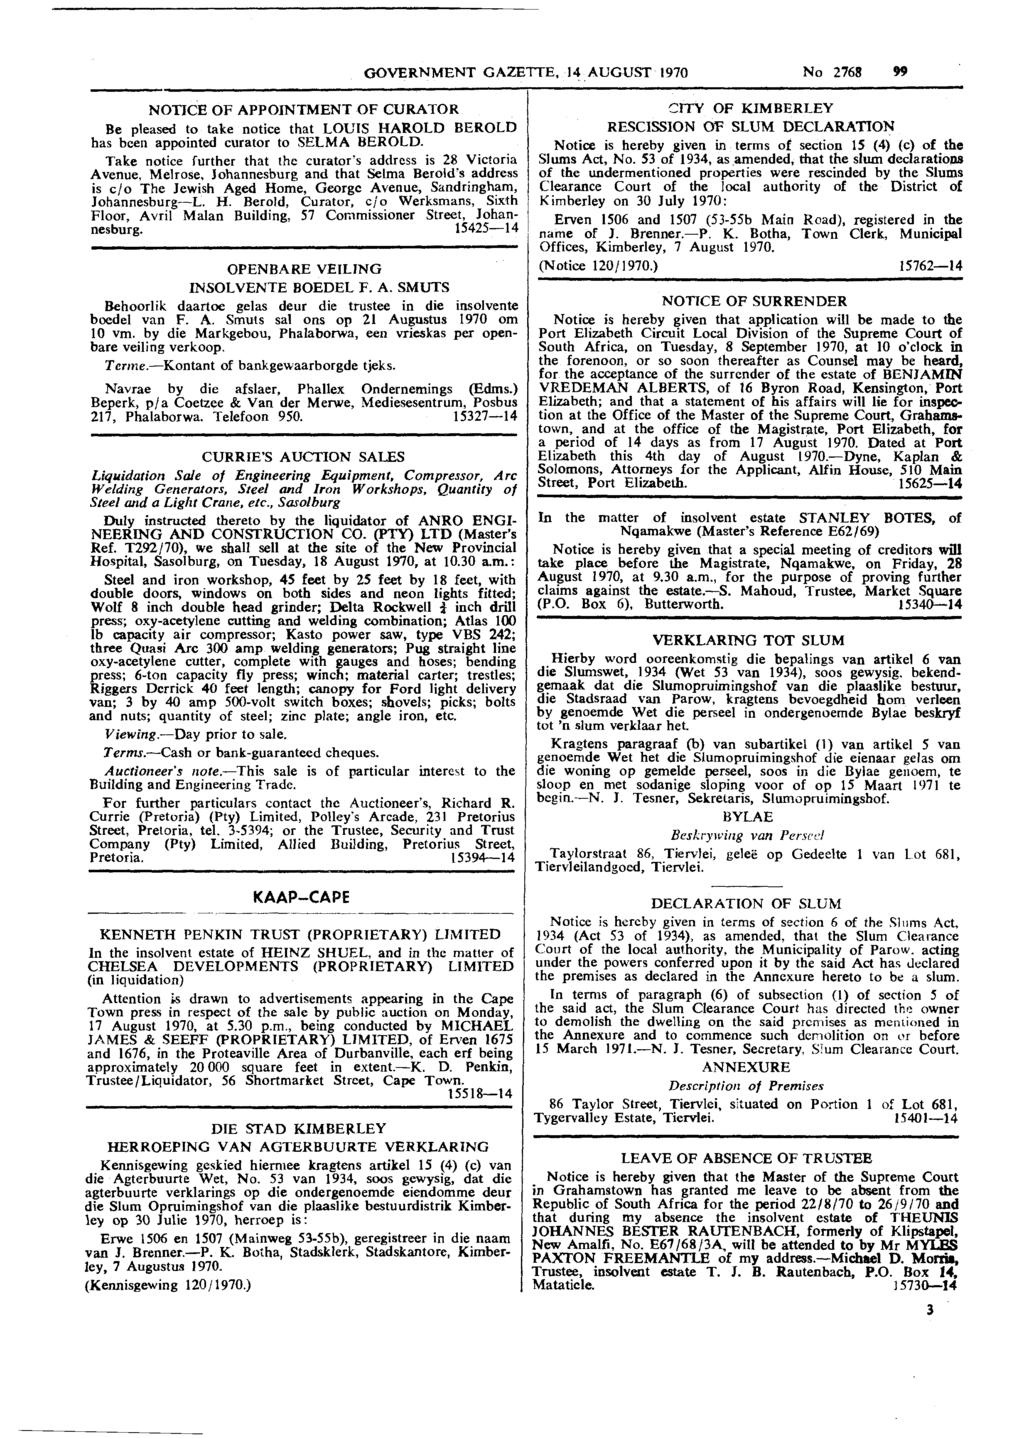 GOVERNMENT GAZETTE. 14 AUGUST 1970 No 2768 99 NOTICE OF APPOINTMENT OF CURATOR Be pleased to take notice that LOUIS HAROLD BEROLD has been appointed curator to SELMA BEROLD.